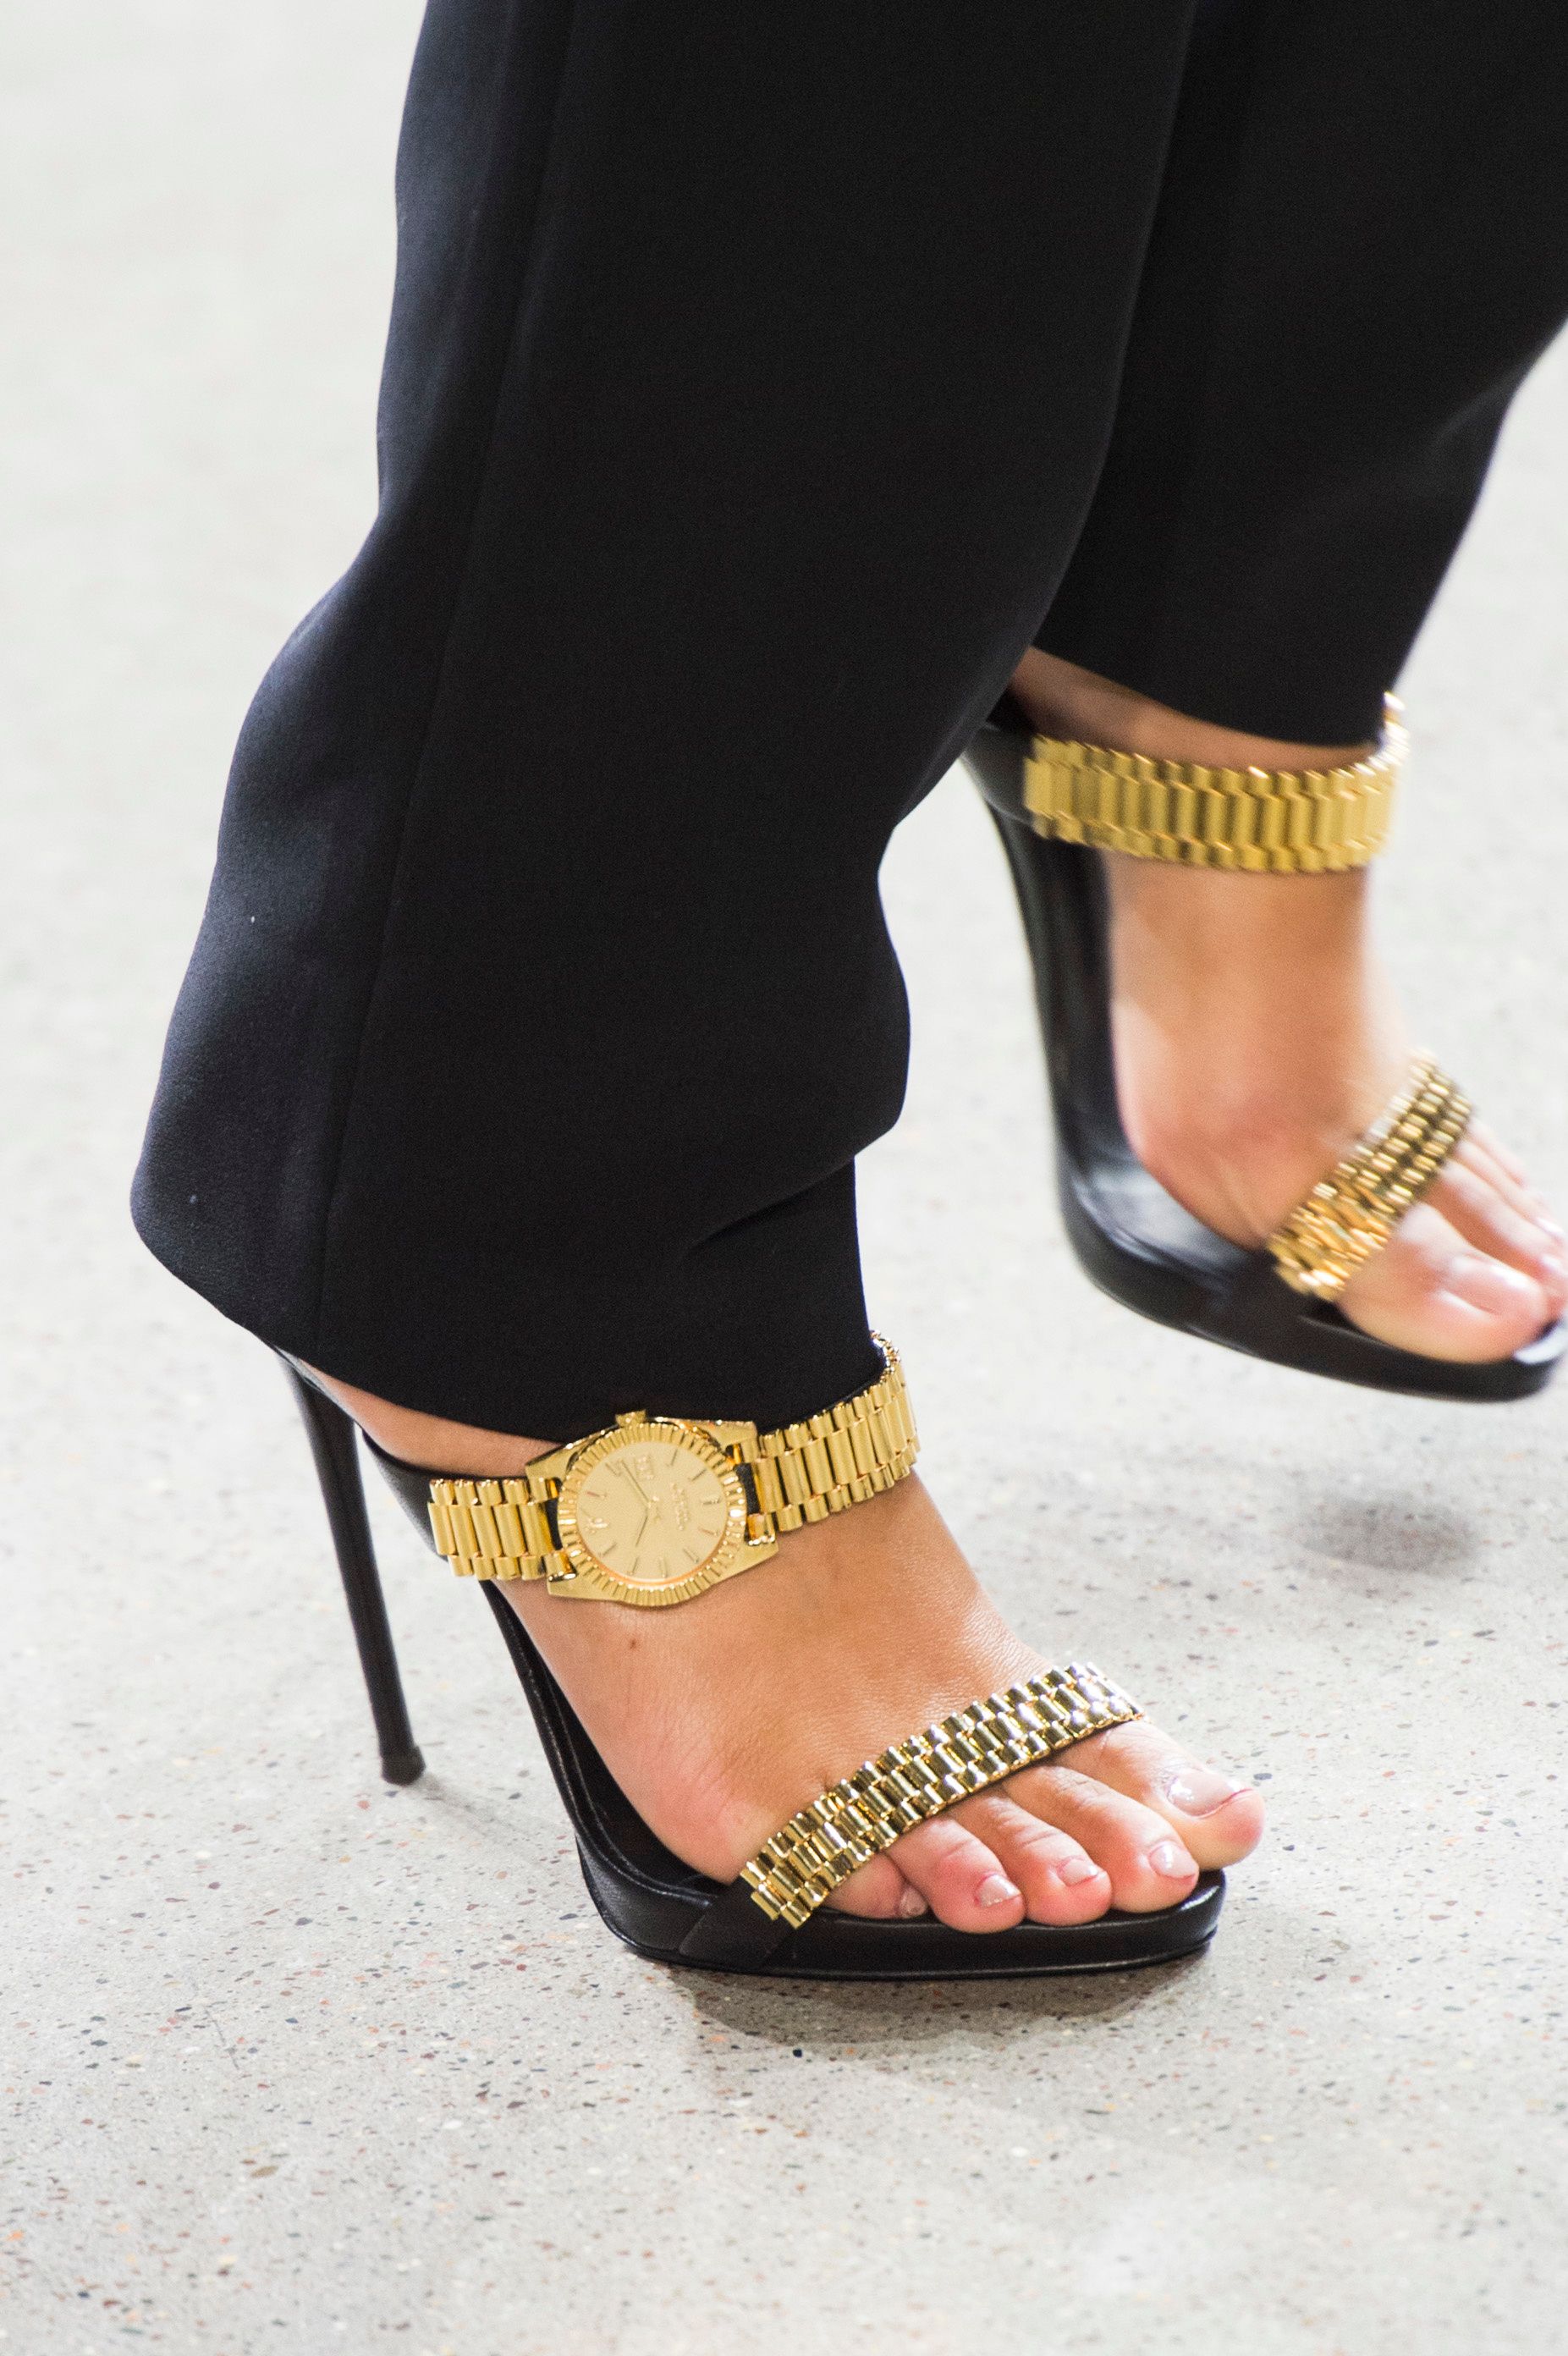 Studded strap heels from Brian Atwood Lucy Hale | Heels, Brian atwood heels,  Brian atwood